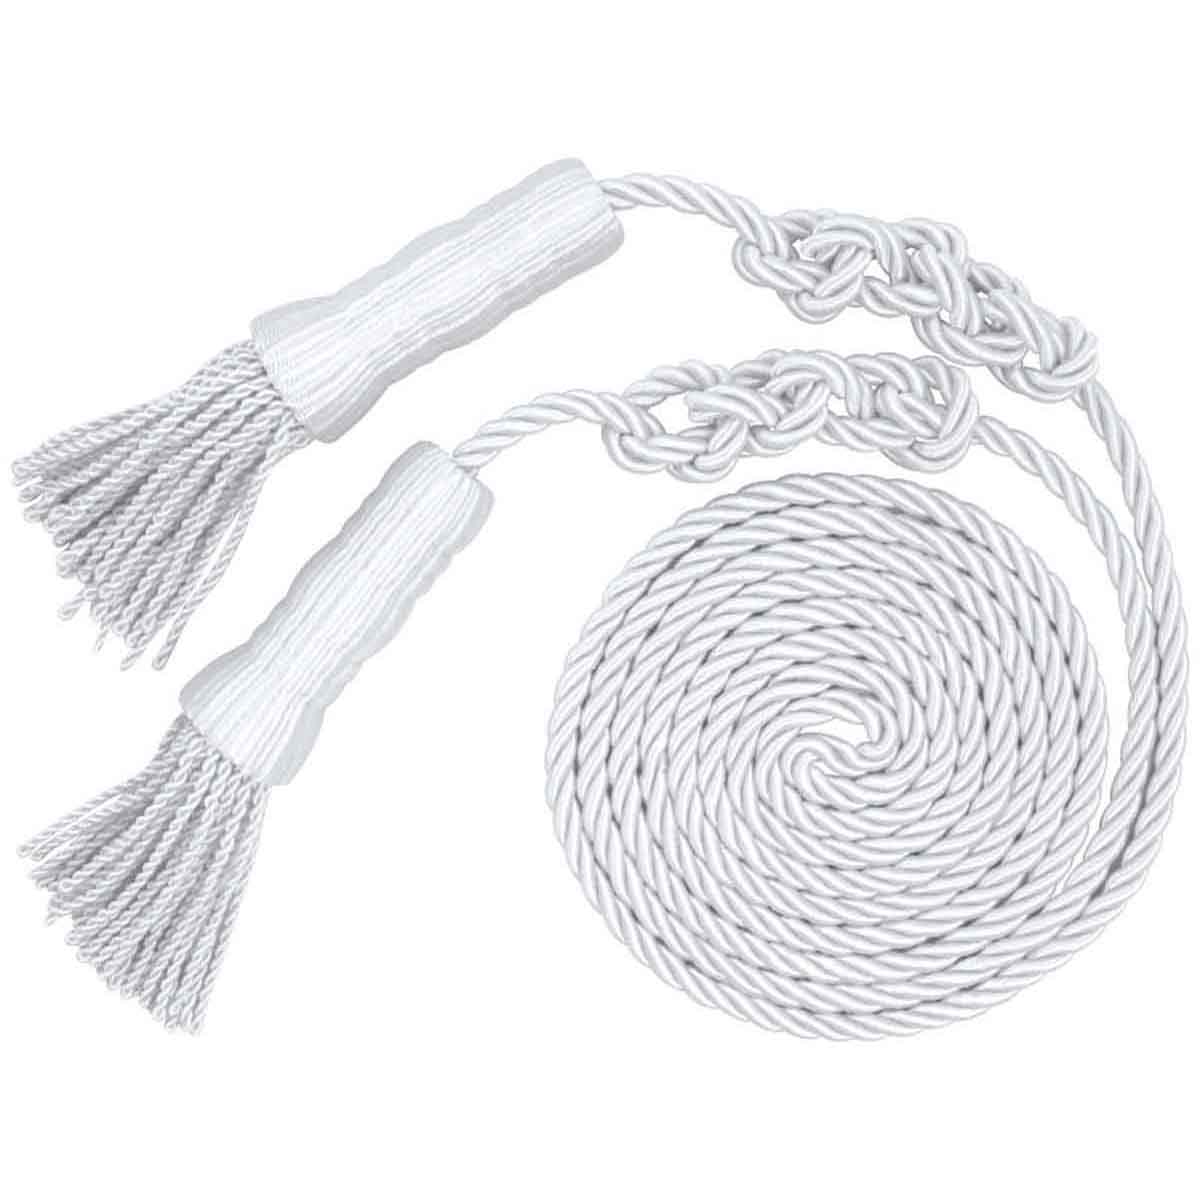 Cord and Tassels, available in multiple sizes and colors.